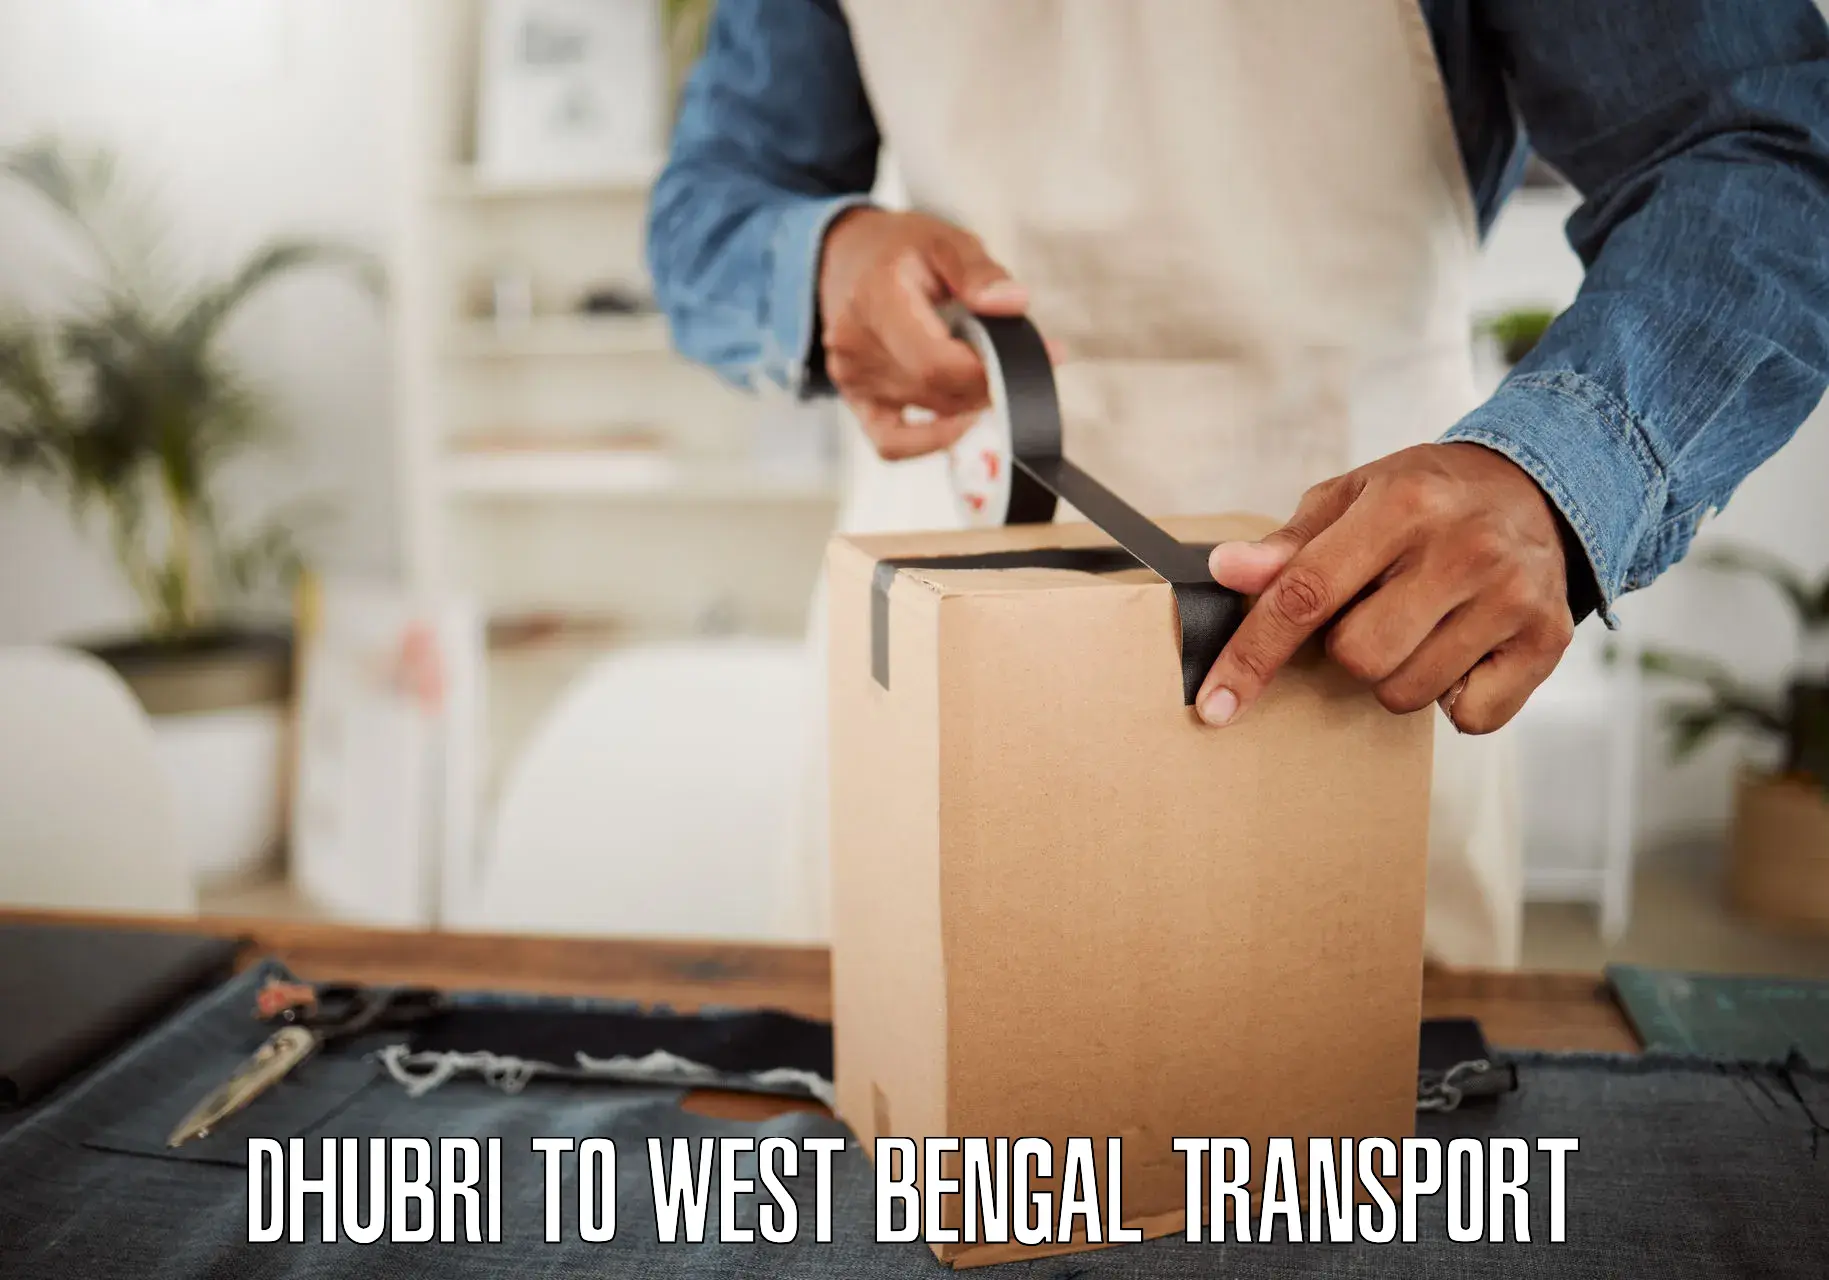 Vehicle transport services Dhubri to Contai